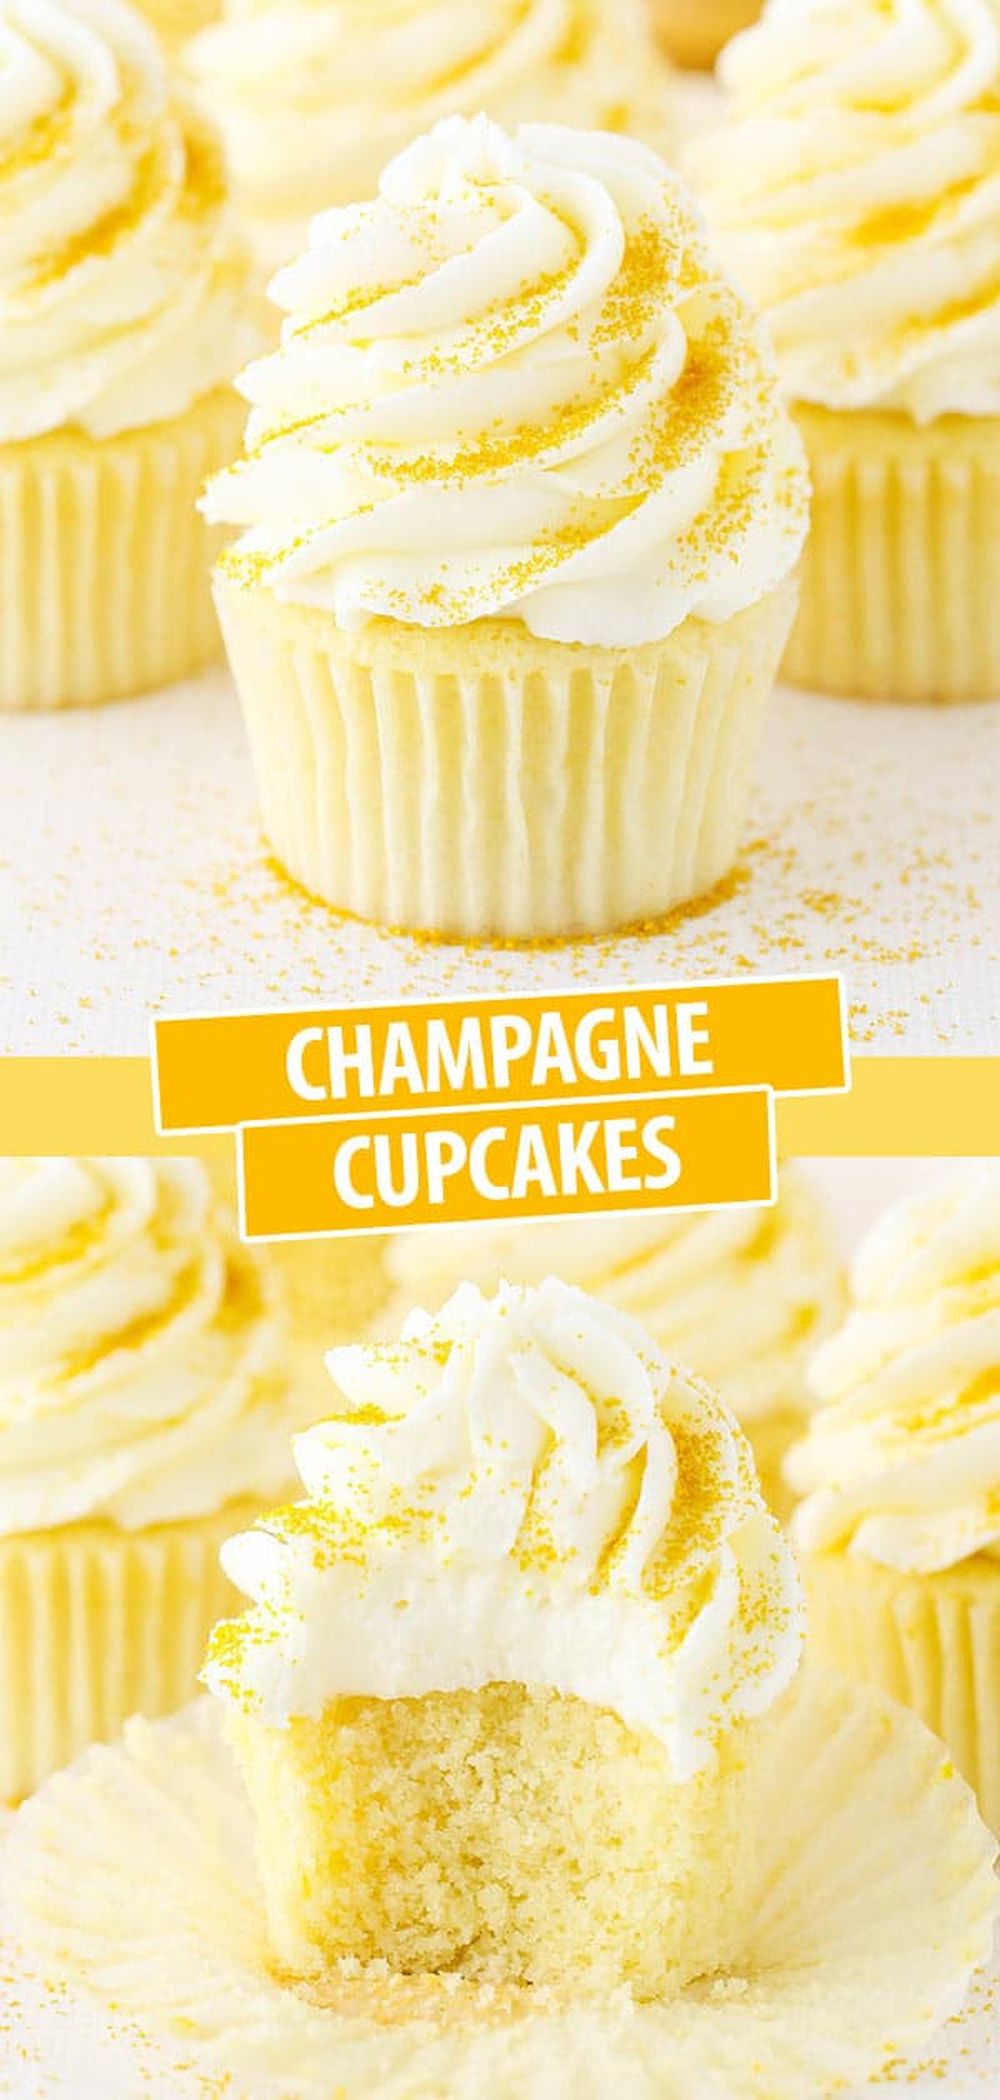 Champagne cupcakes homemade edible valentine’s day gifts